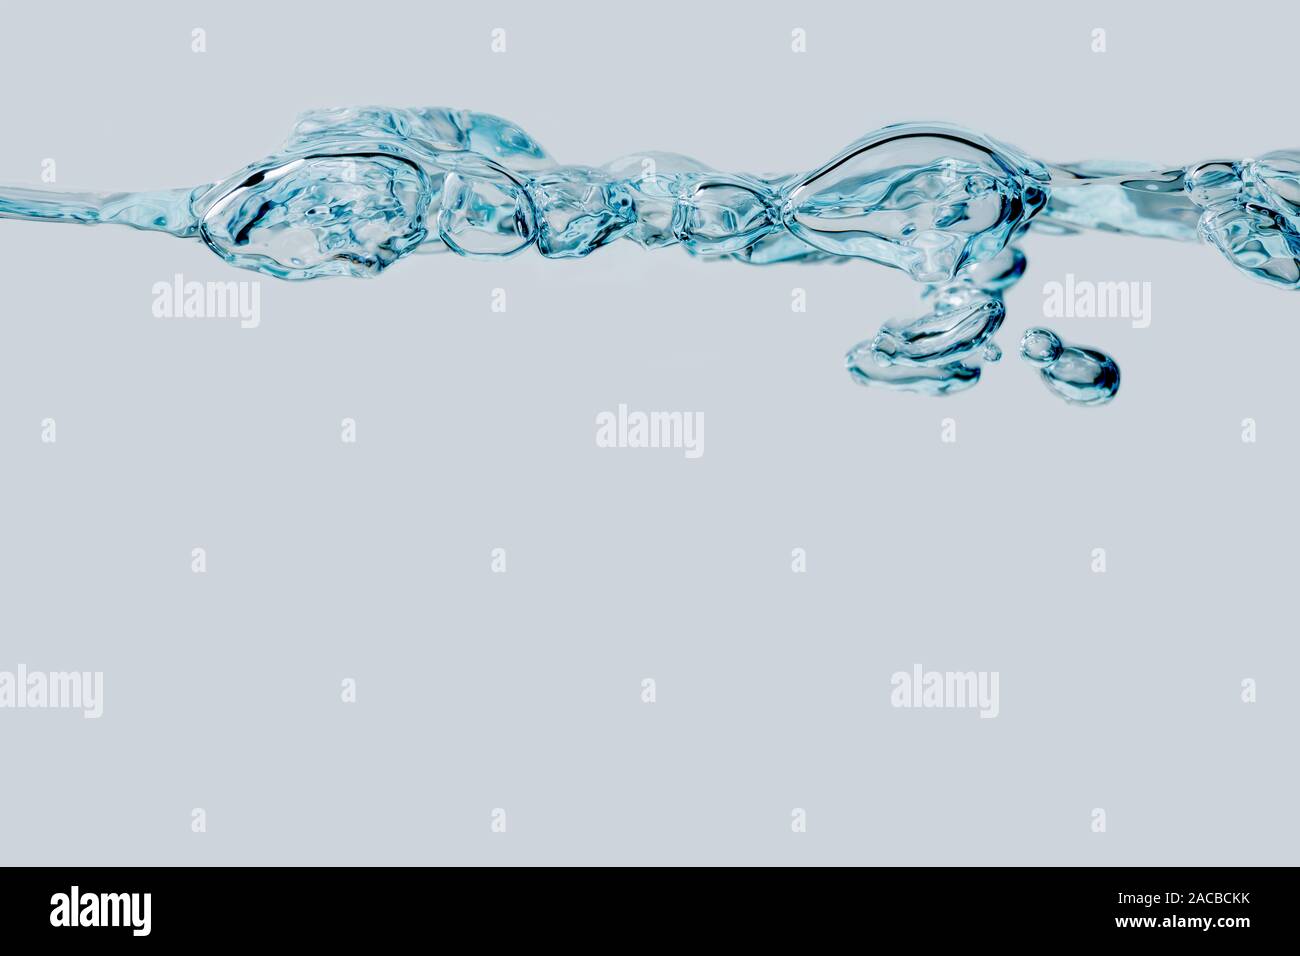 Studio shot of a series of bubbles at the water surface in side view in front of bright blue background. Stock Photo